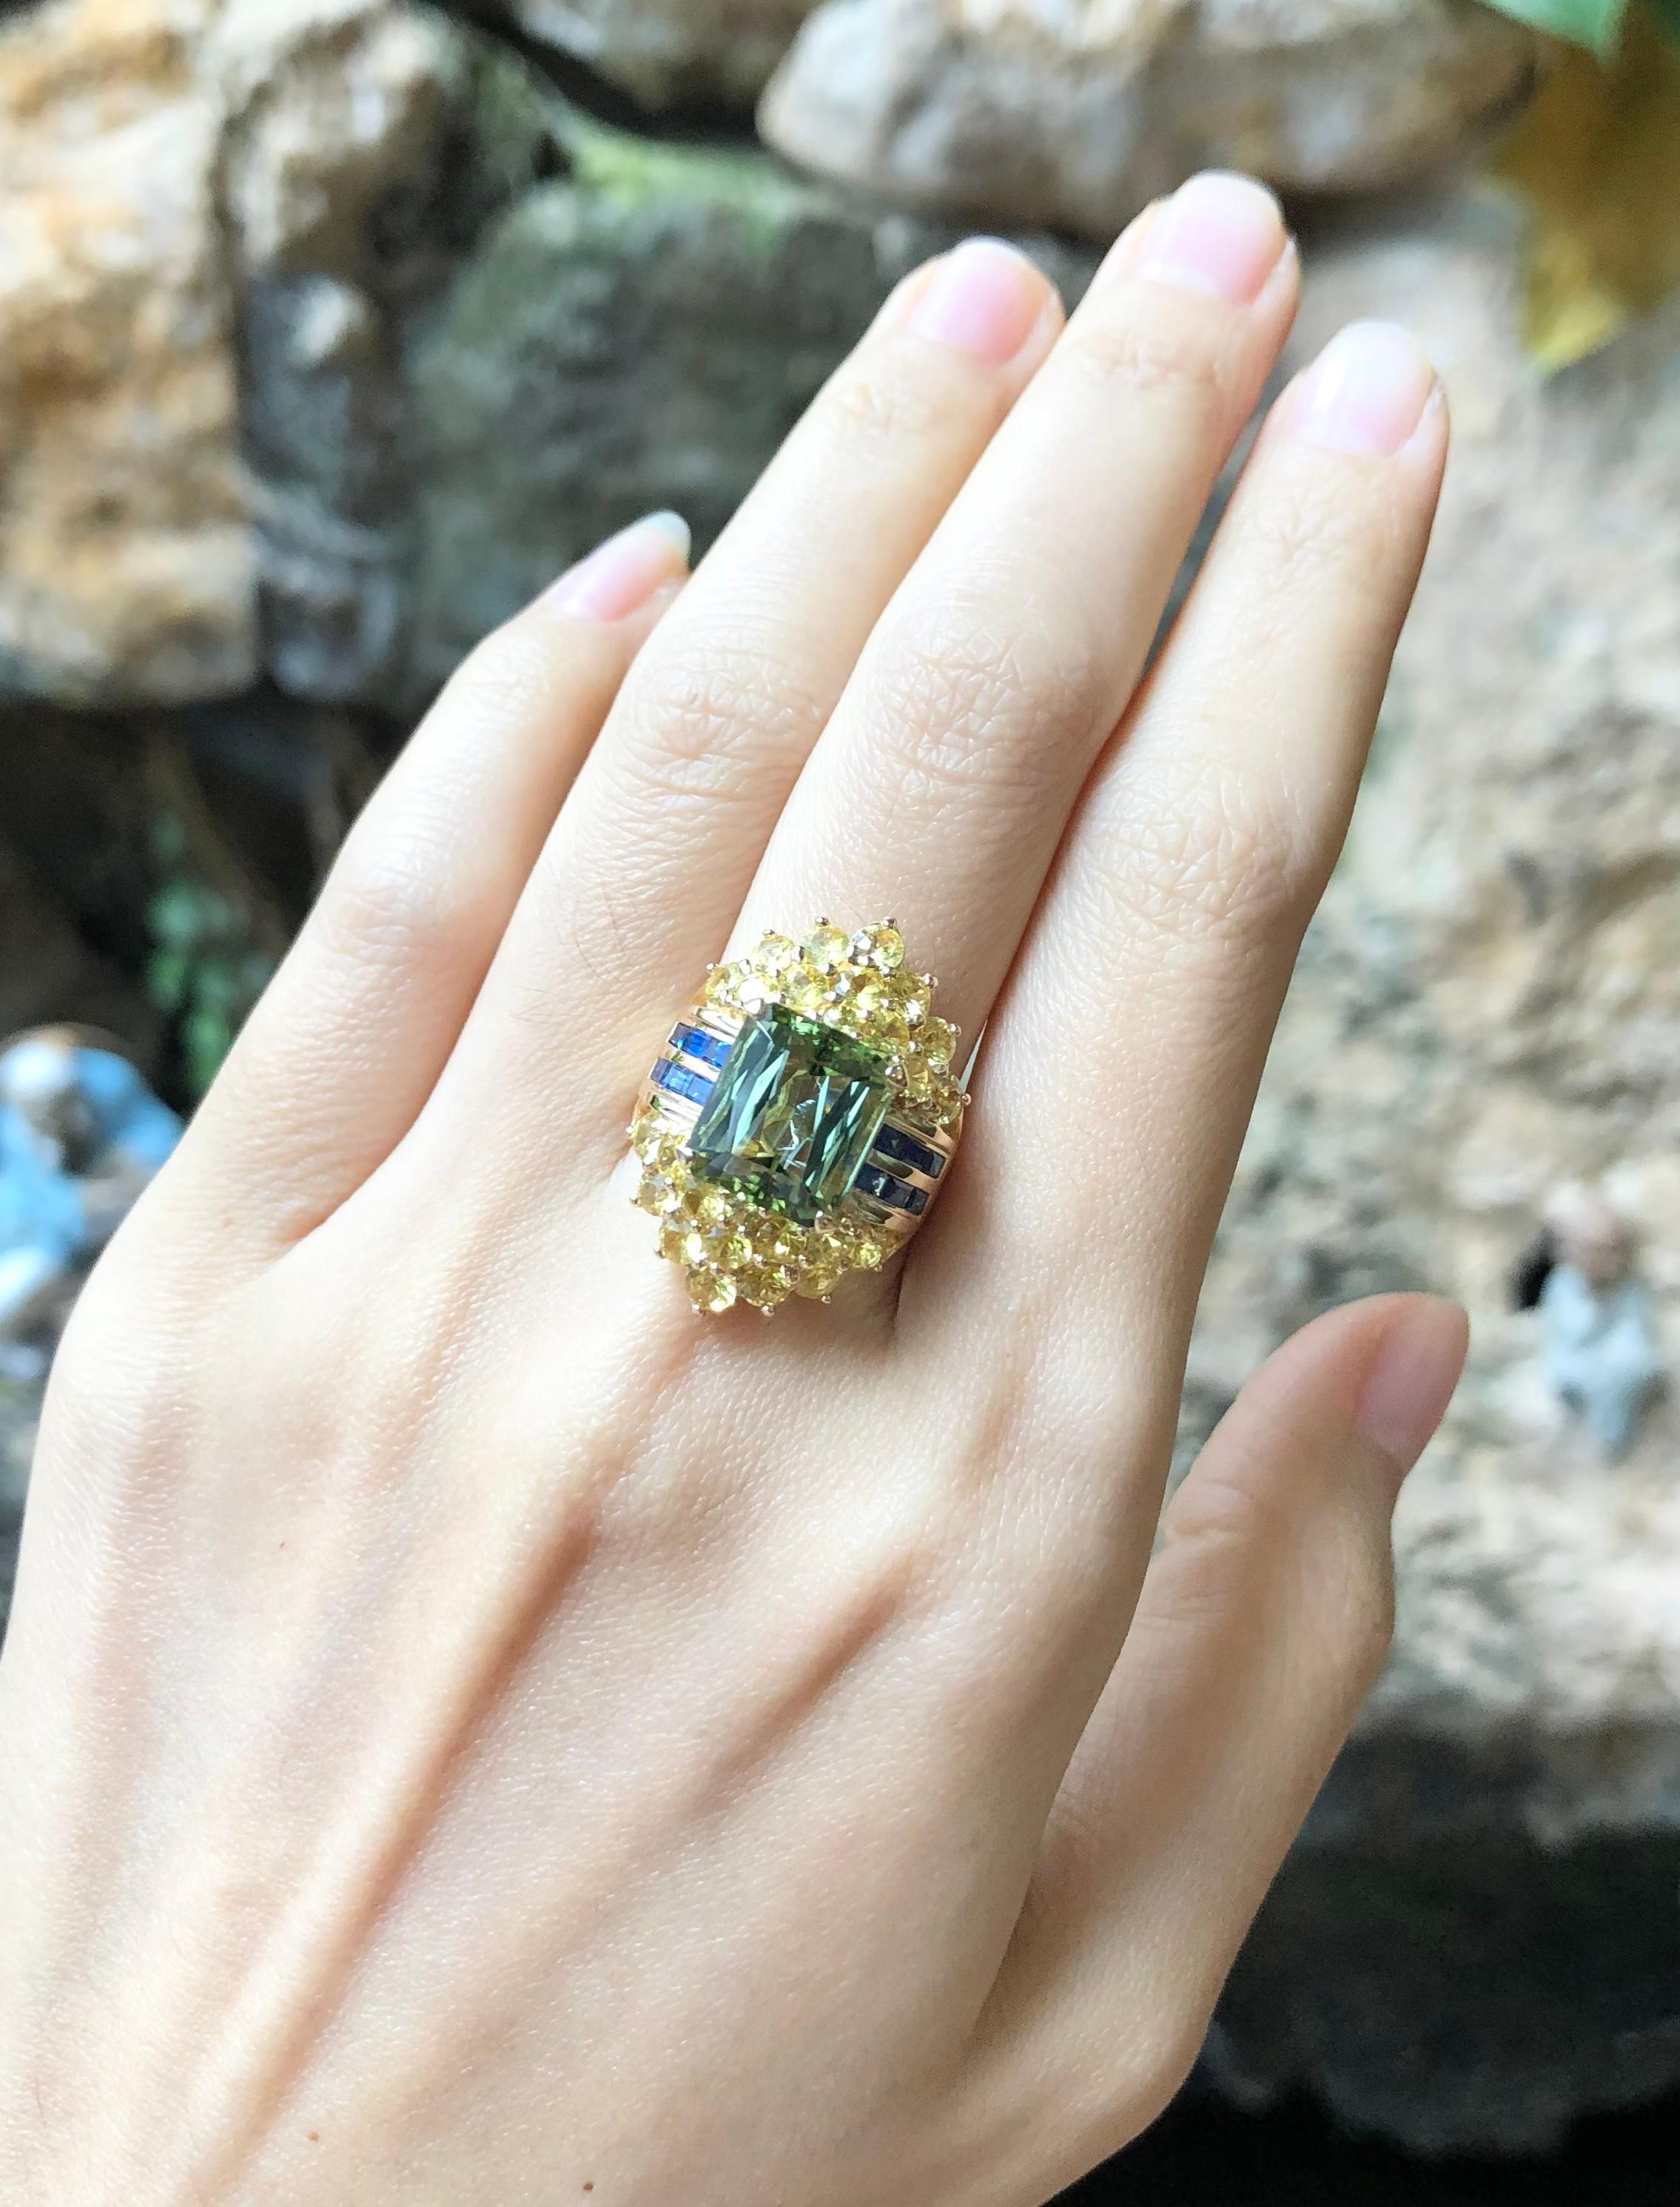 Green Tourmaline 6.21 carats with Blue Sapphire 1.09 carats and Yellow Sapphire 2.80 carats Ring set in 18 Karat Gold Settings

Width:  1.9 cm 
Length: 2.6 cm
Ring Size: 53
Total Weight: 11.92 grams

